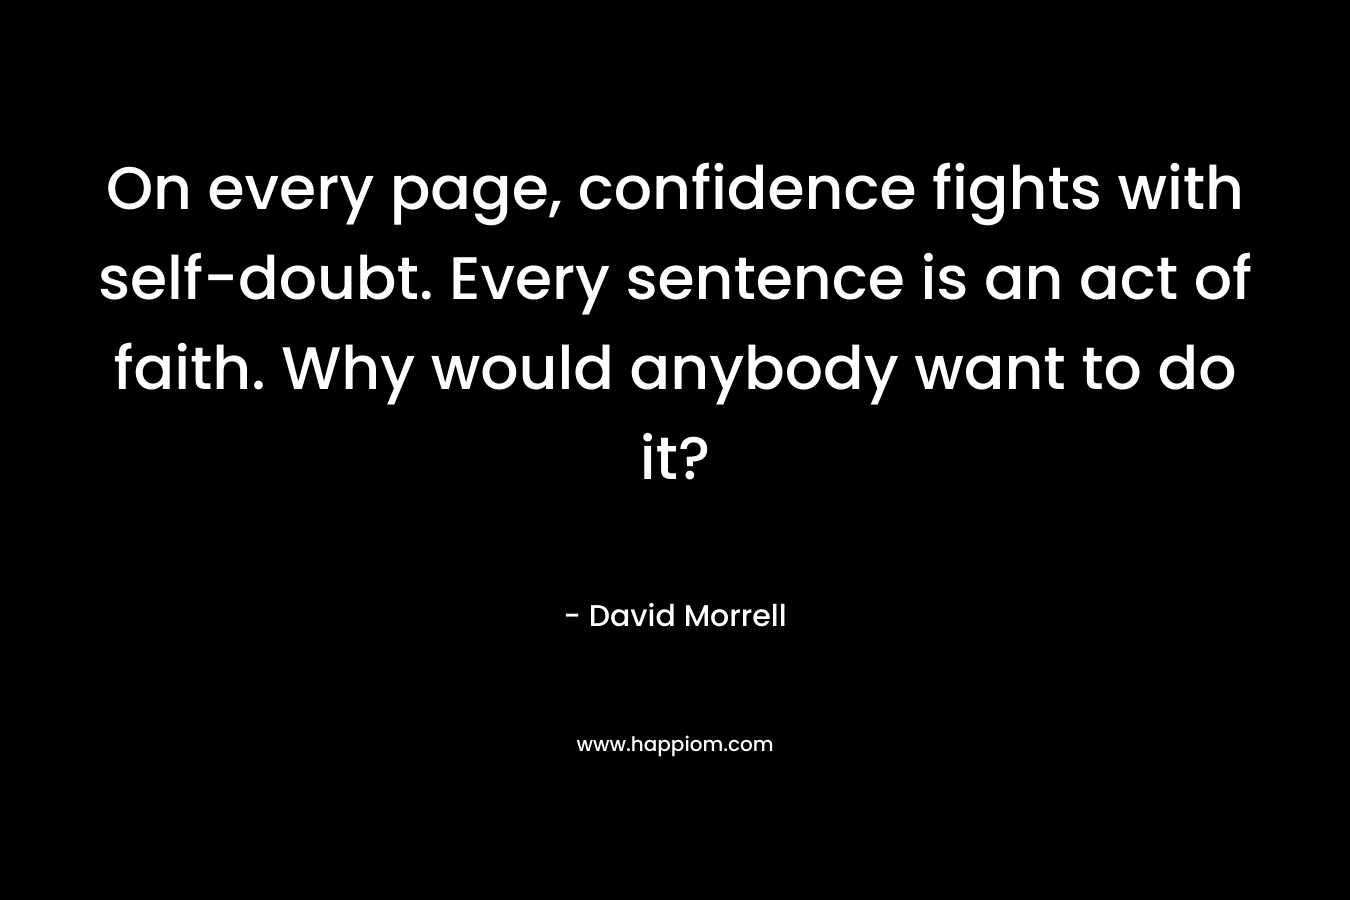 On every page, confidence fights with self-doubt. Every sentence is an act of faith. Why would anybody want to do it? – David Morrell